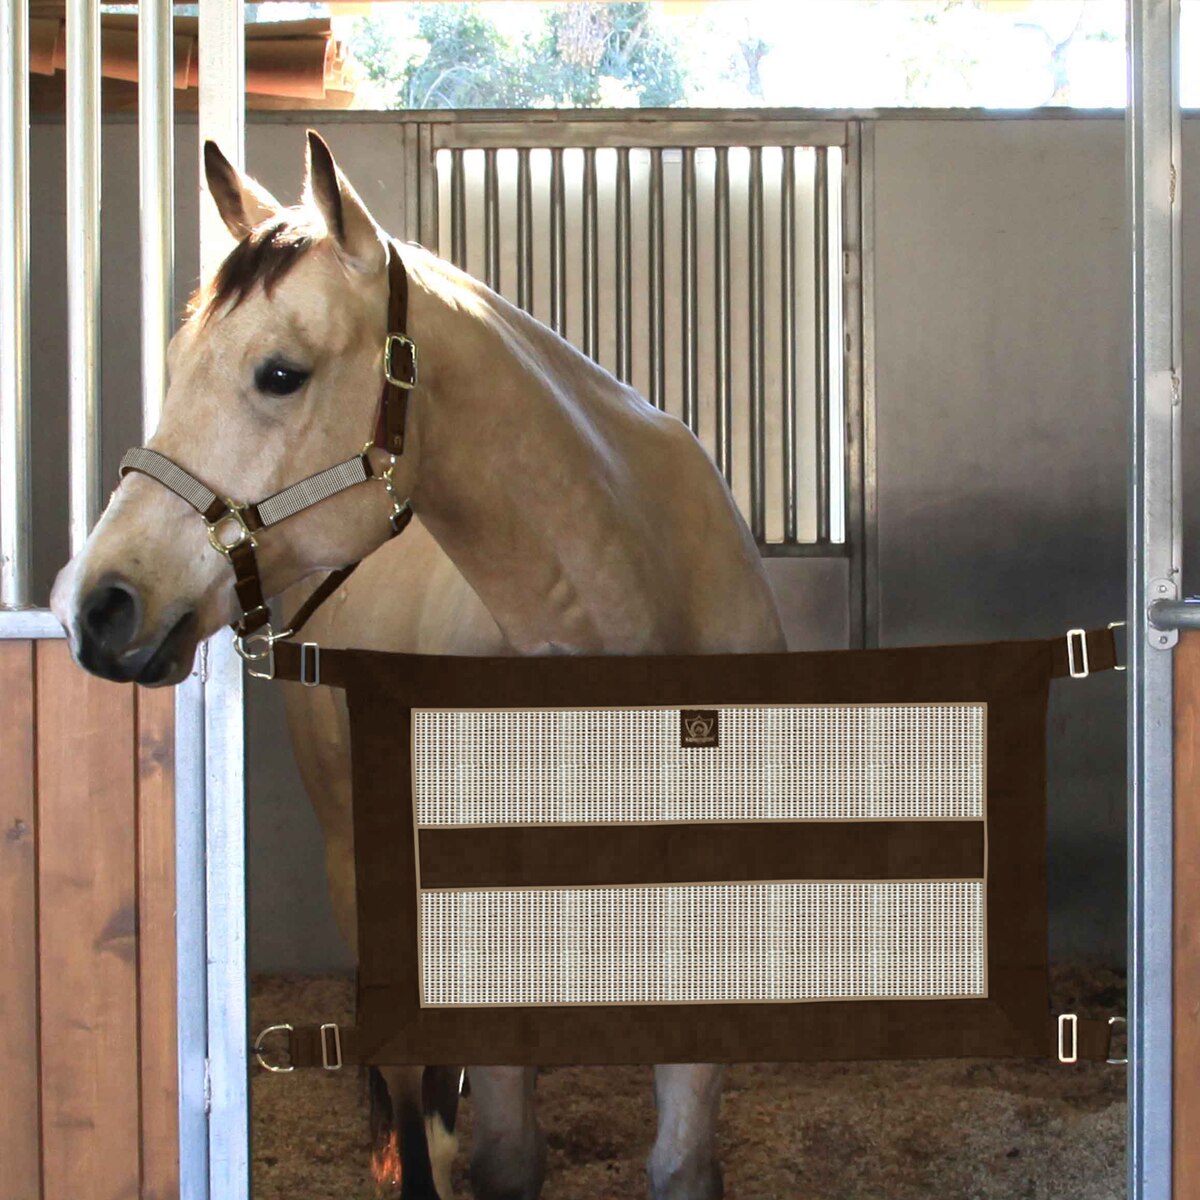 Kensington Door Guard for Horses — Designed to Keep Horse Securely in Stall in Style — Adjustable Straps and Hardware Included 